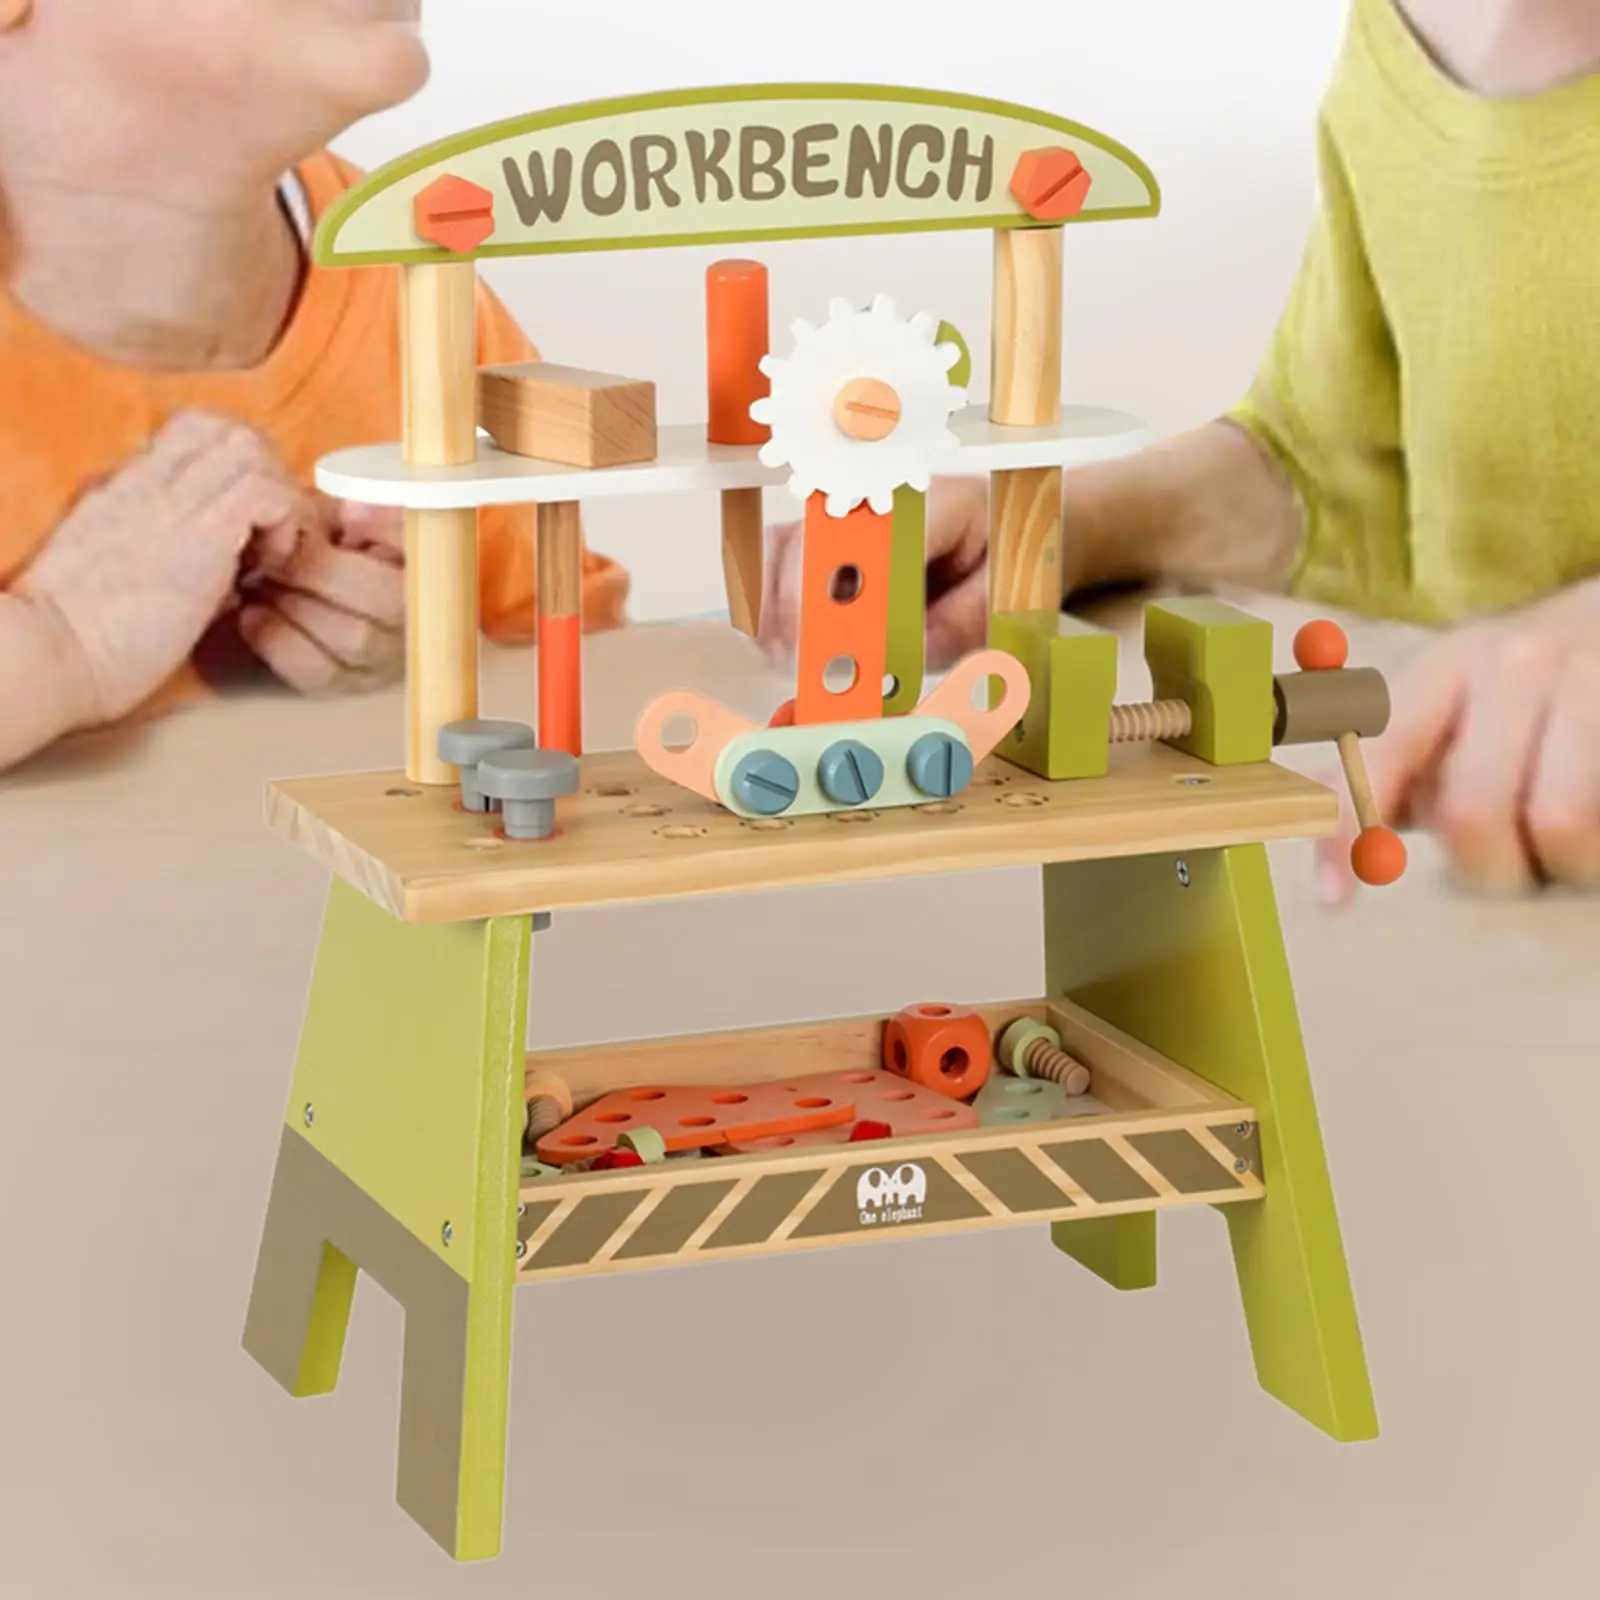 Pretend Play Construction Toy DIY Kid`s Wooden Tool Bench Toy for Child Holiday Present Ages 3+ Christmas Gifts Easy to Assemble